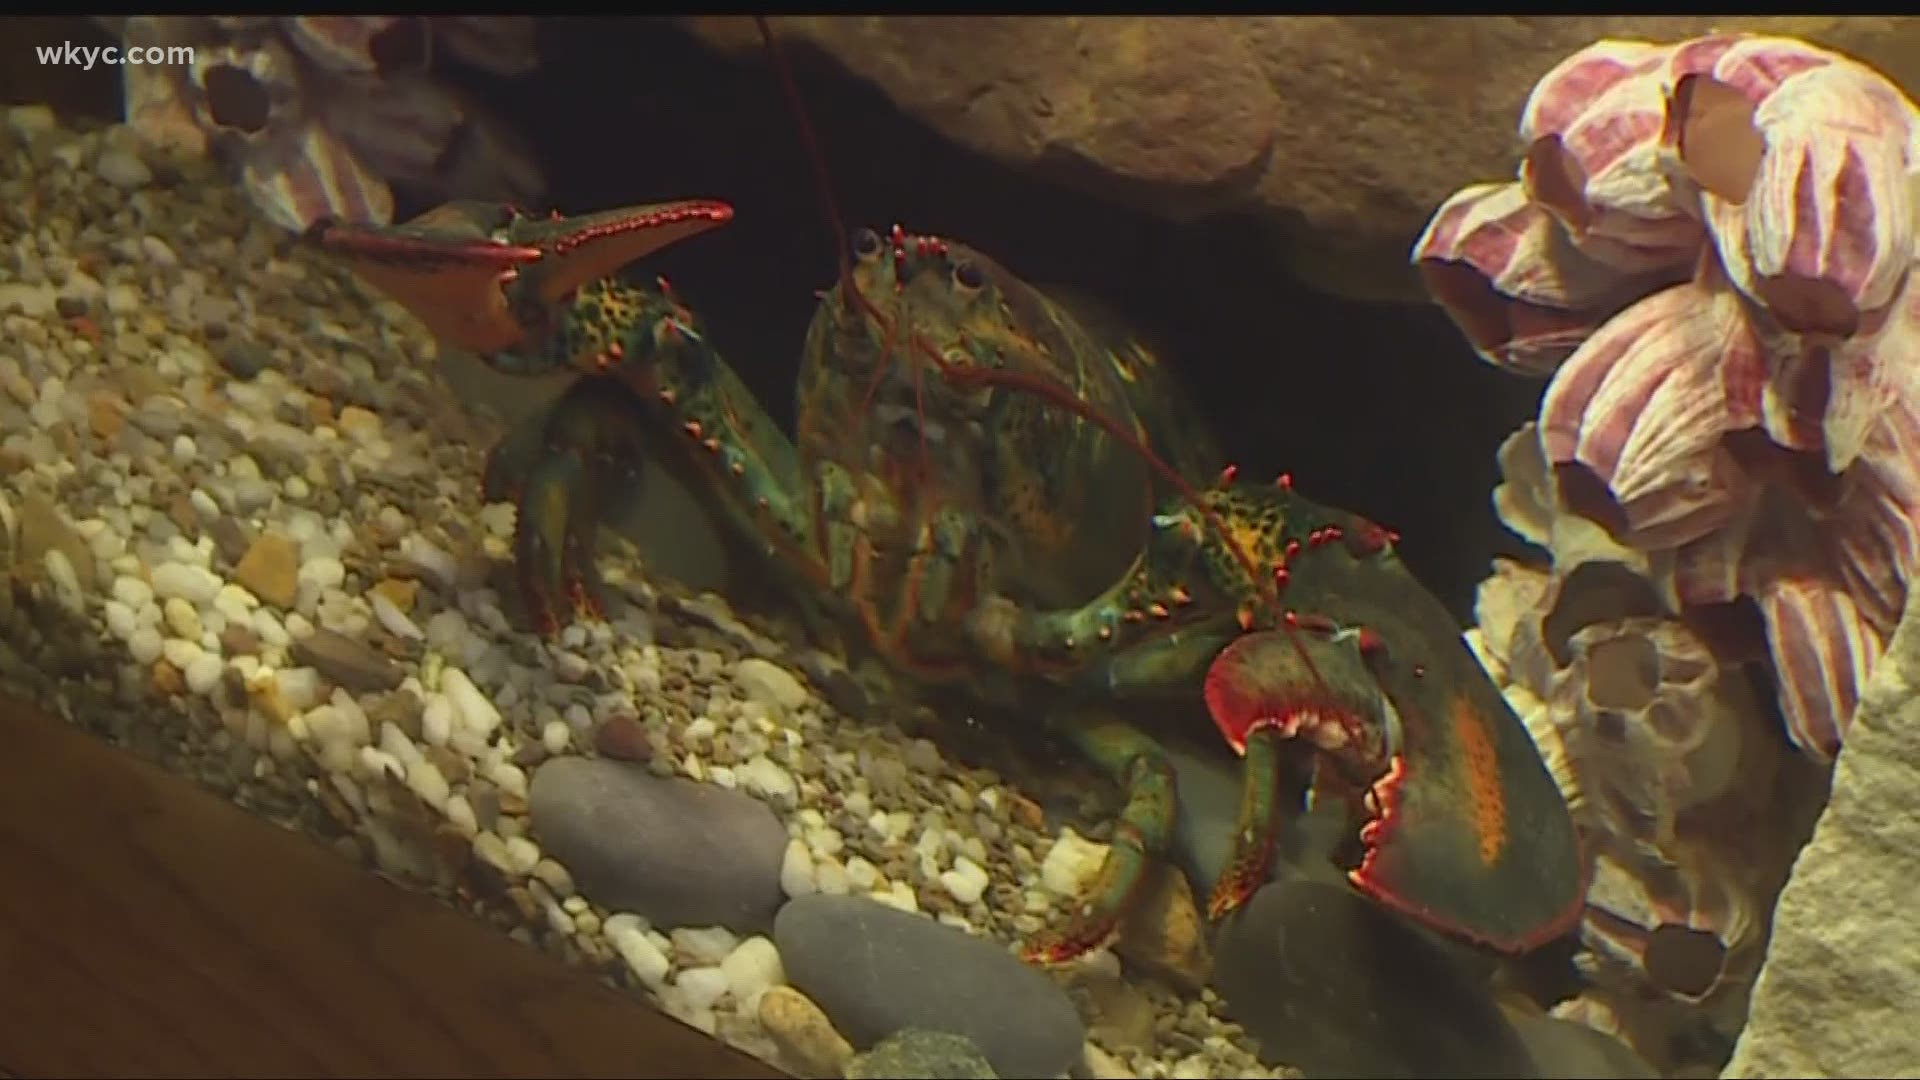 Zoo officials say Clawdia the lobster now has more of a "rainbow-colored" shell after molting last fall. Will Ujek gives us an update.